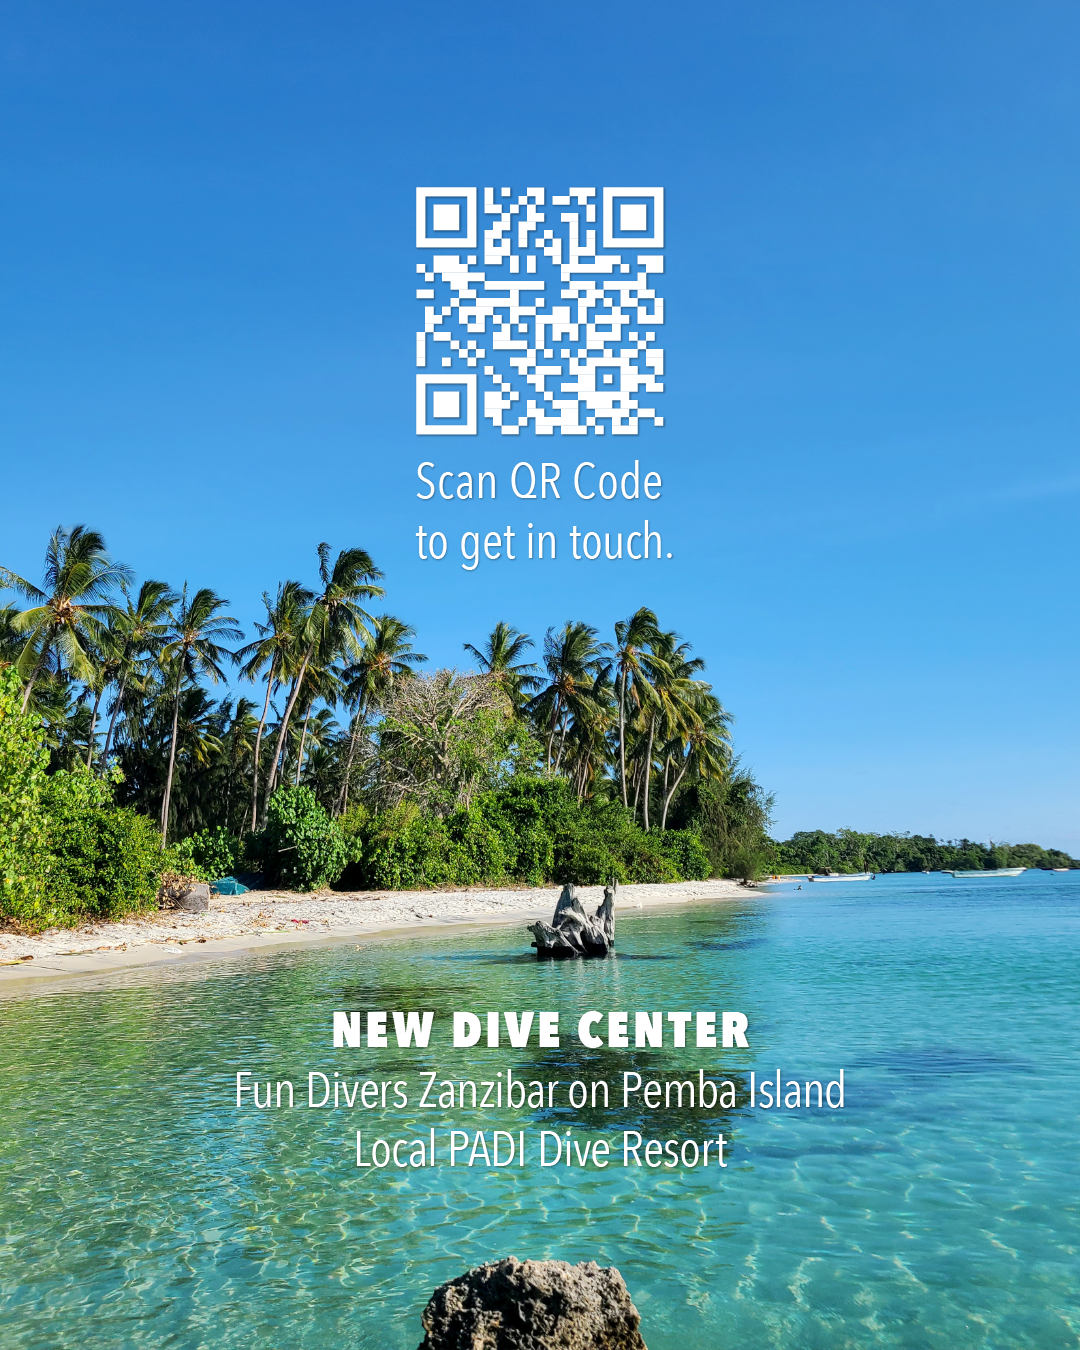 Pemba Island New Dive Center Fun Divers Zanzibar (PADI). Dive the breathtaking underwater world of Pemba Island with local experts! Scan QR Code to get in touch. We are open daily 8 am to 5 pm.